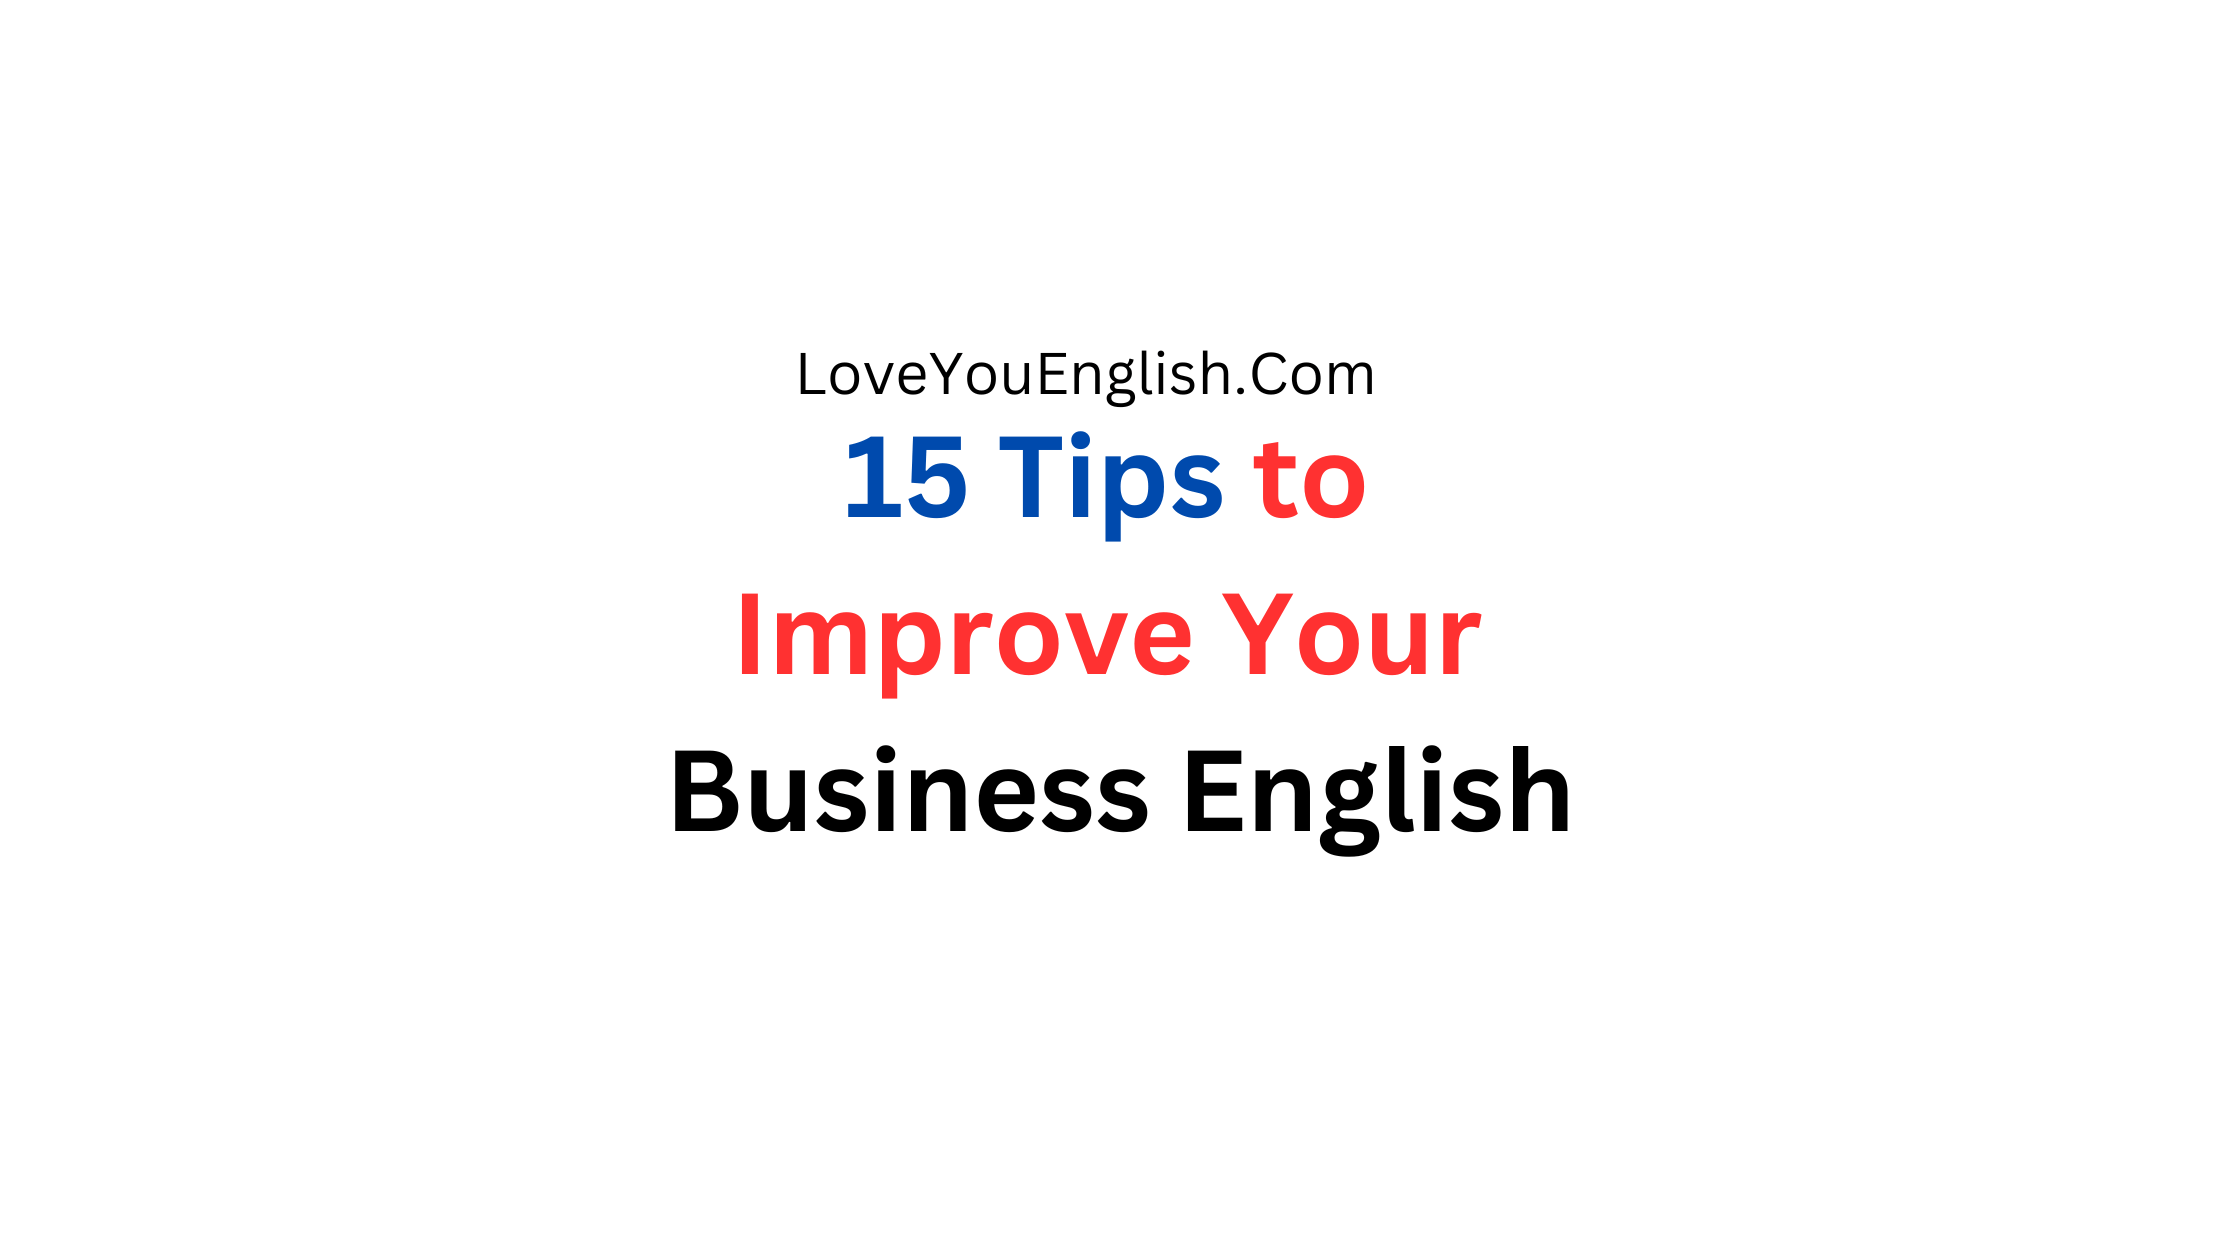 15 Tips to Improve Your Business English